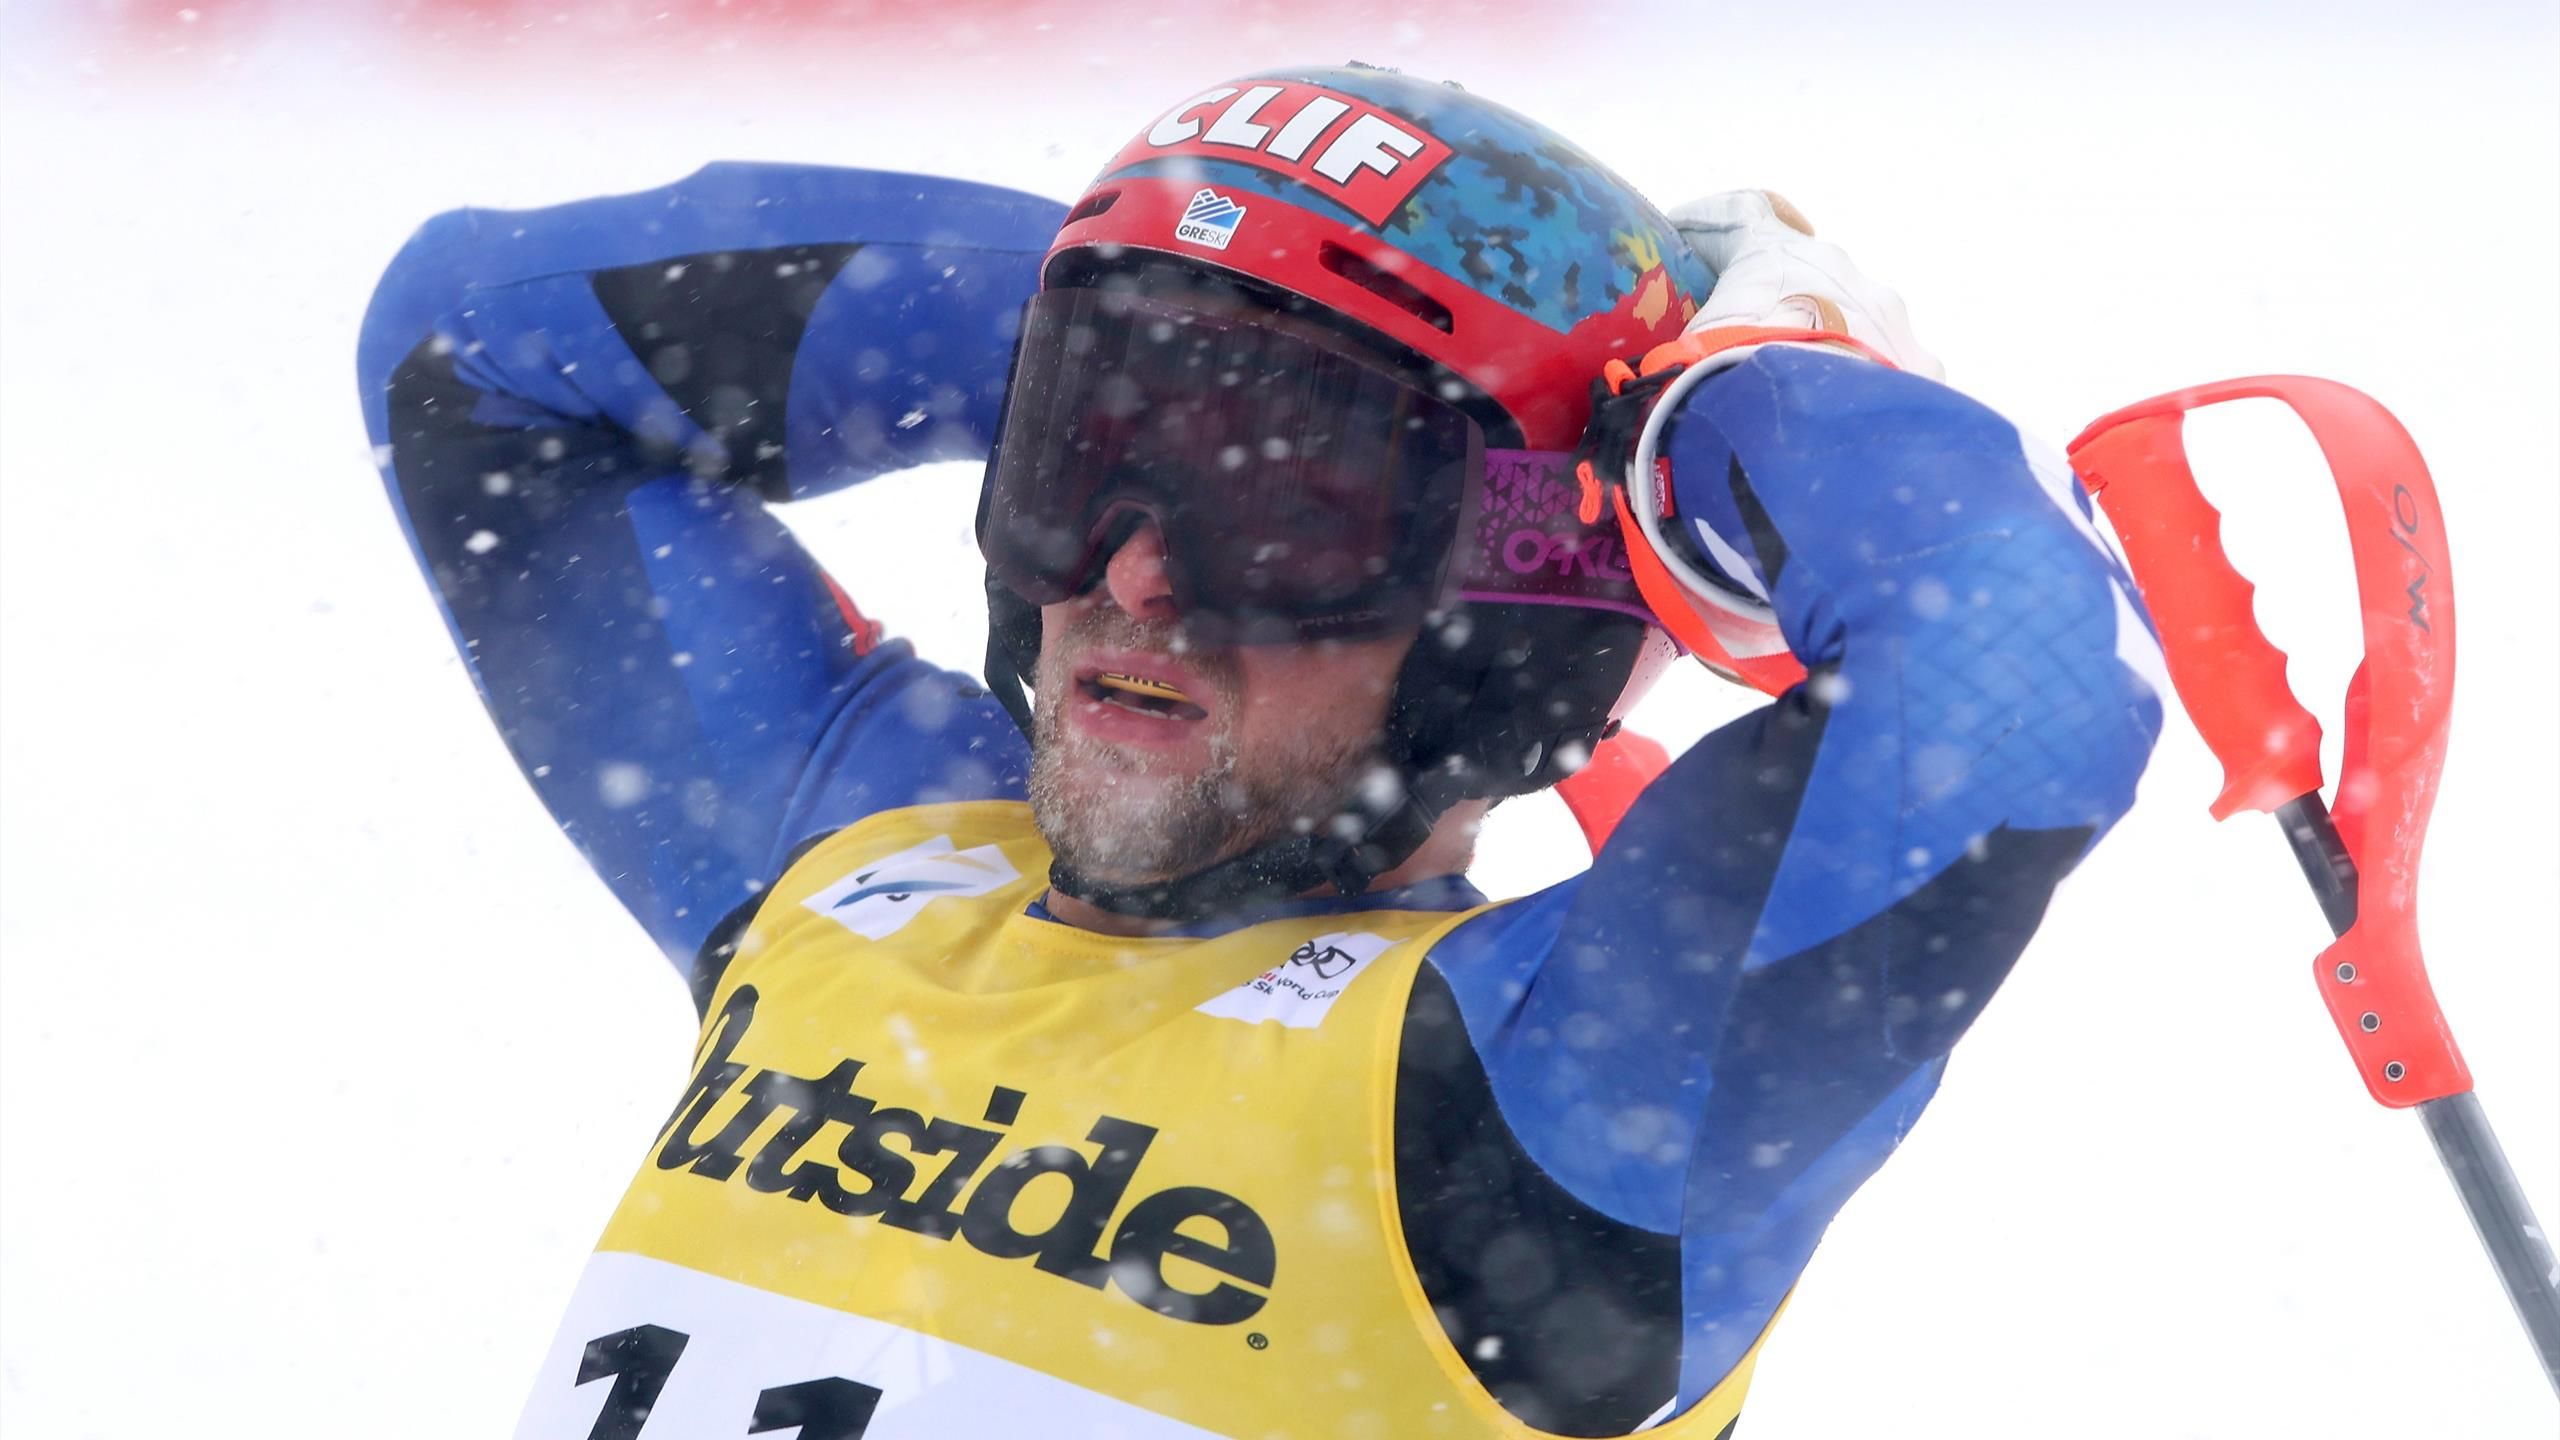 AJ Ginnis admits straddle during mens slalom at Palisades Tahoe - it doesnt look good for me!